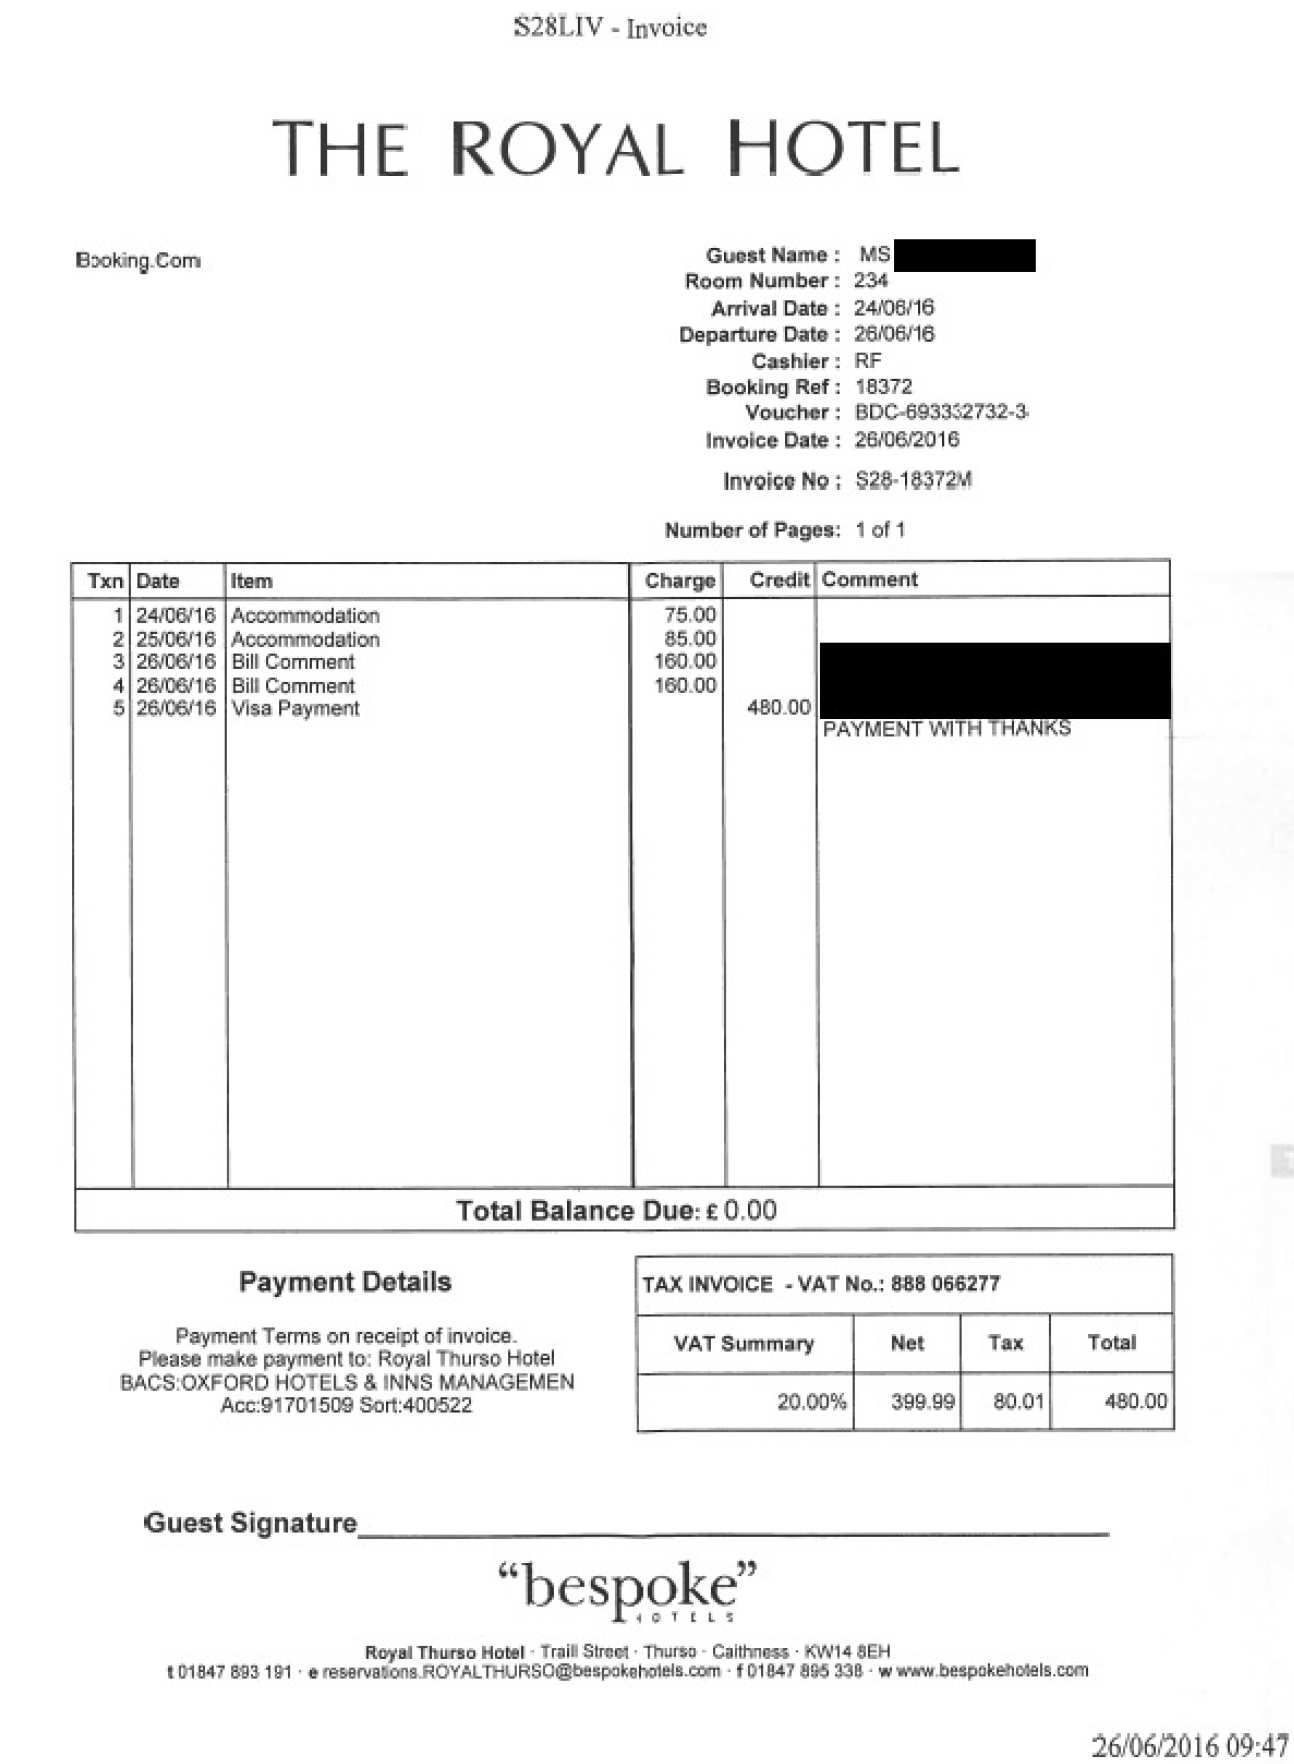 receipt-examples-administration-and-support-services-imperial-college-london